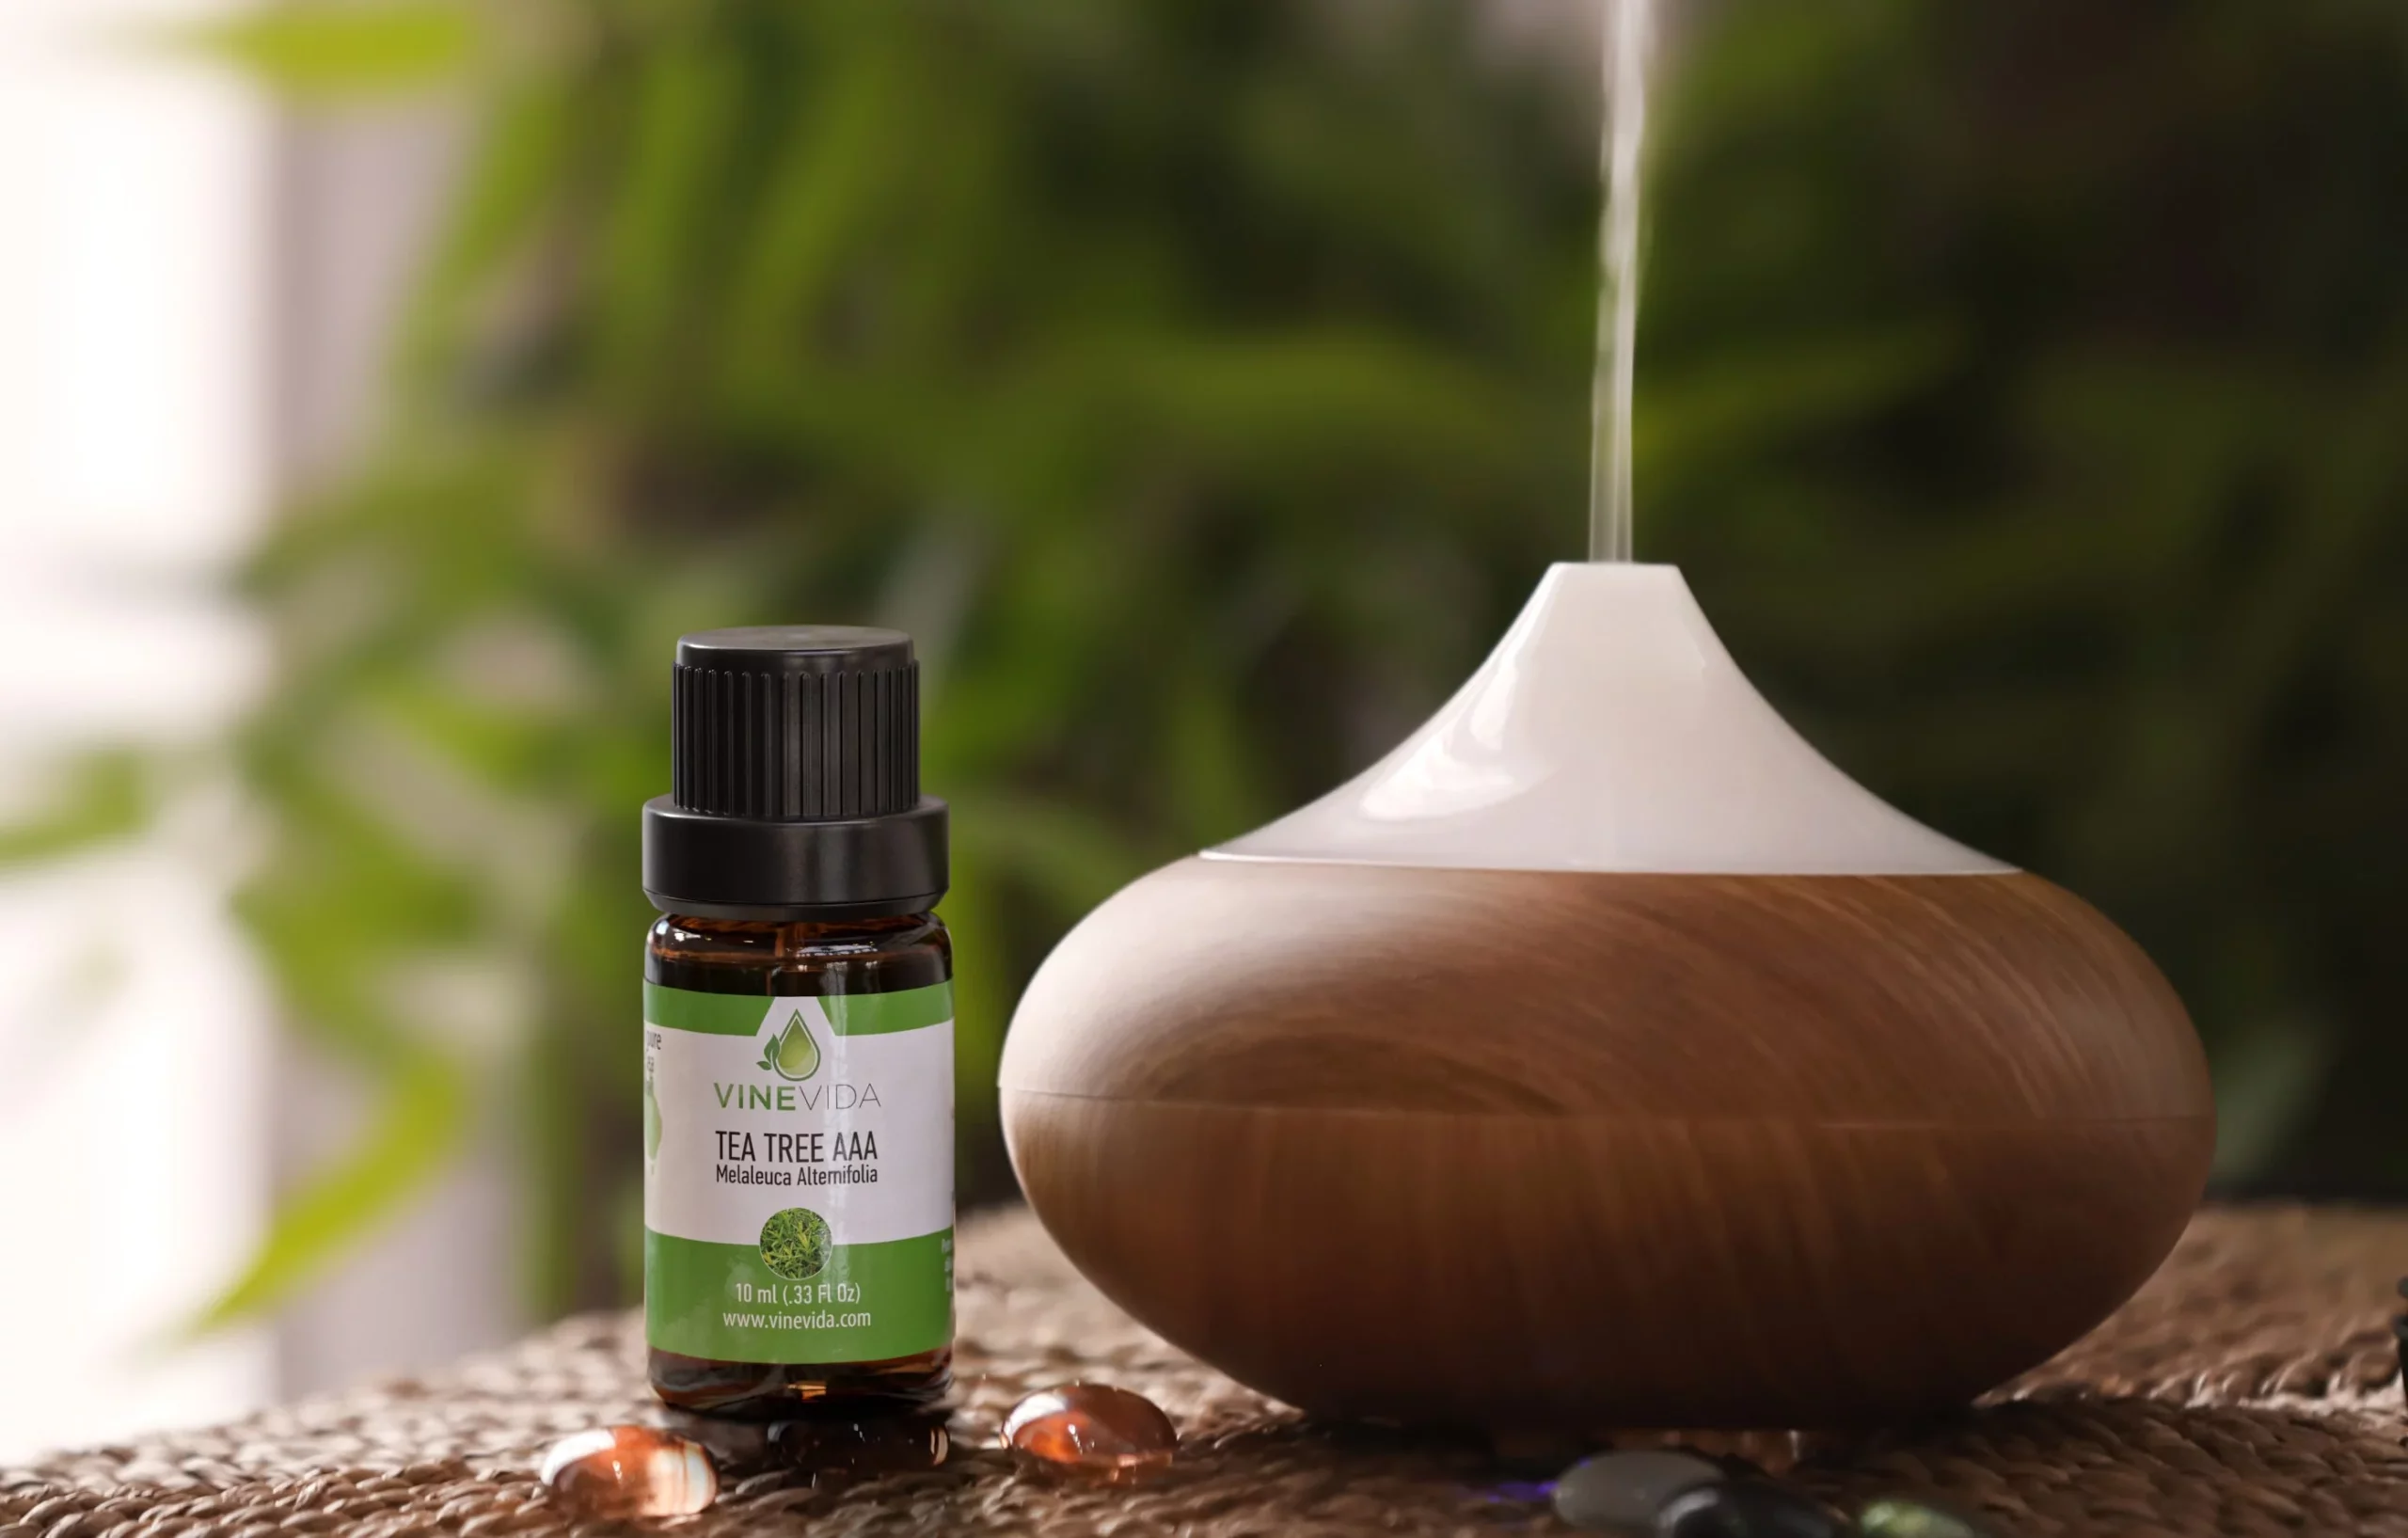 Enhance your home and office ambiance with essential oils, diffused using elegant essential oil diffusers